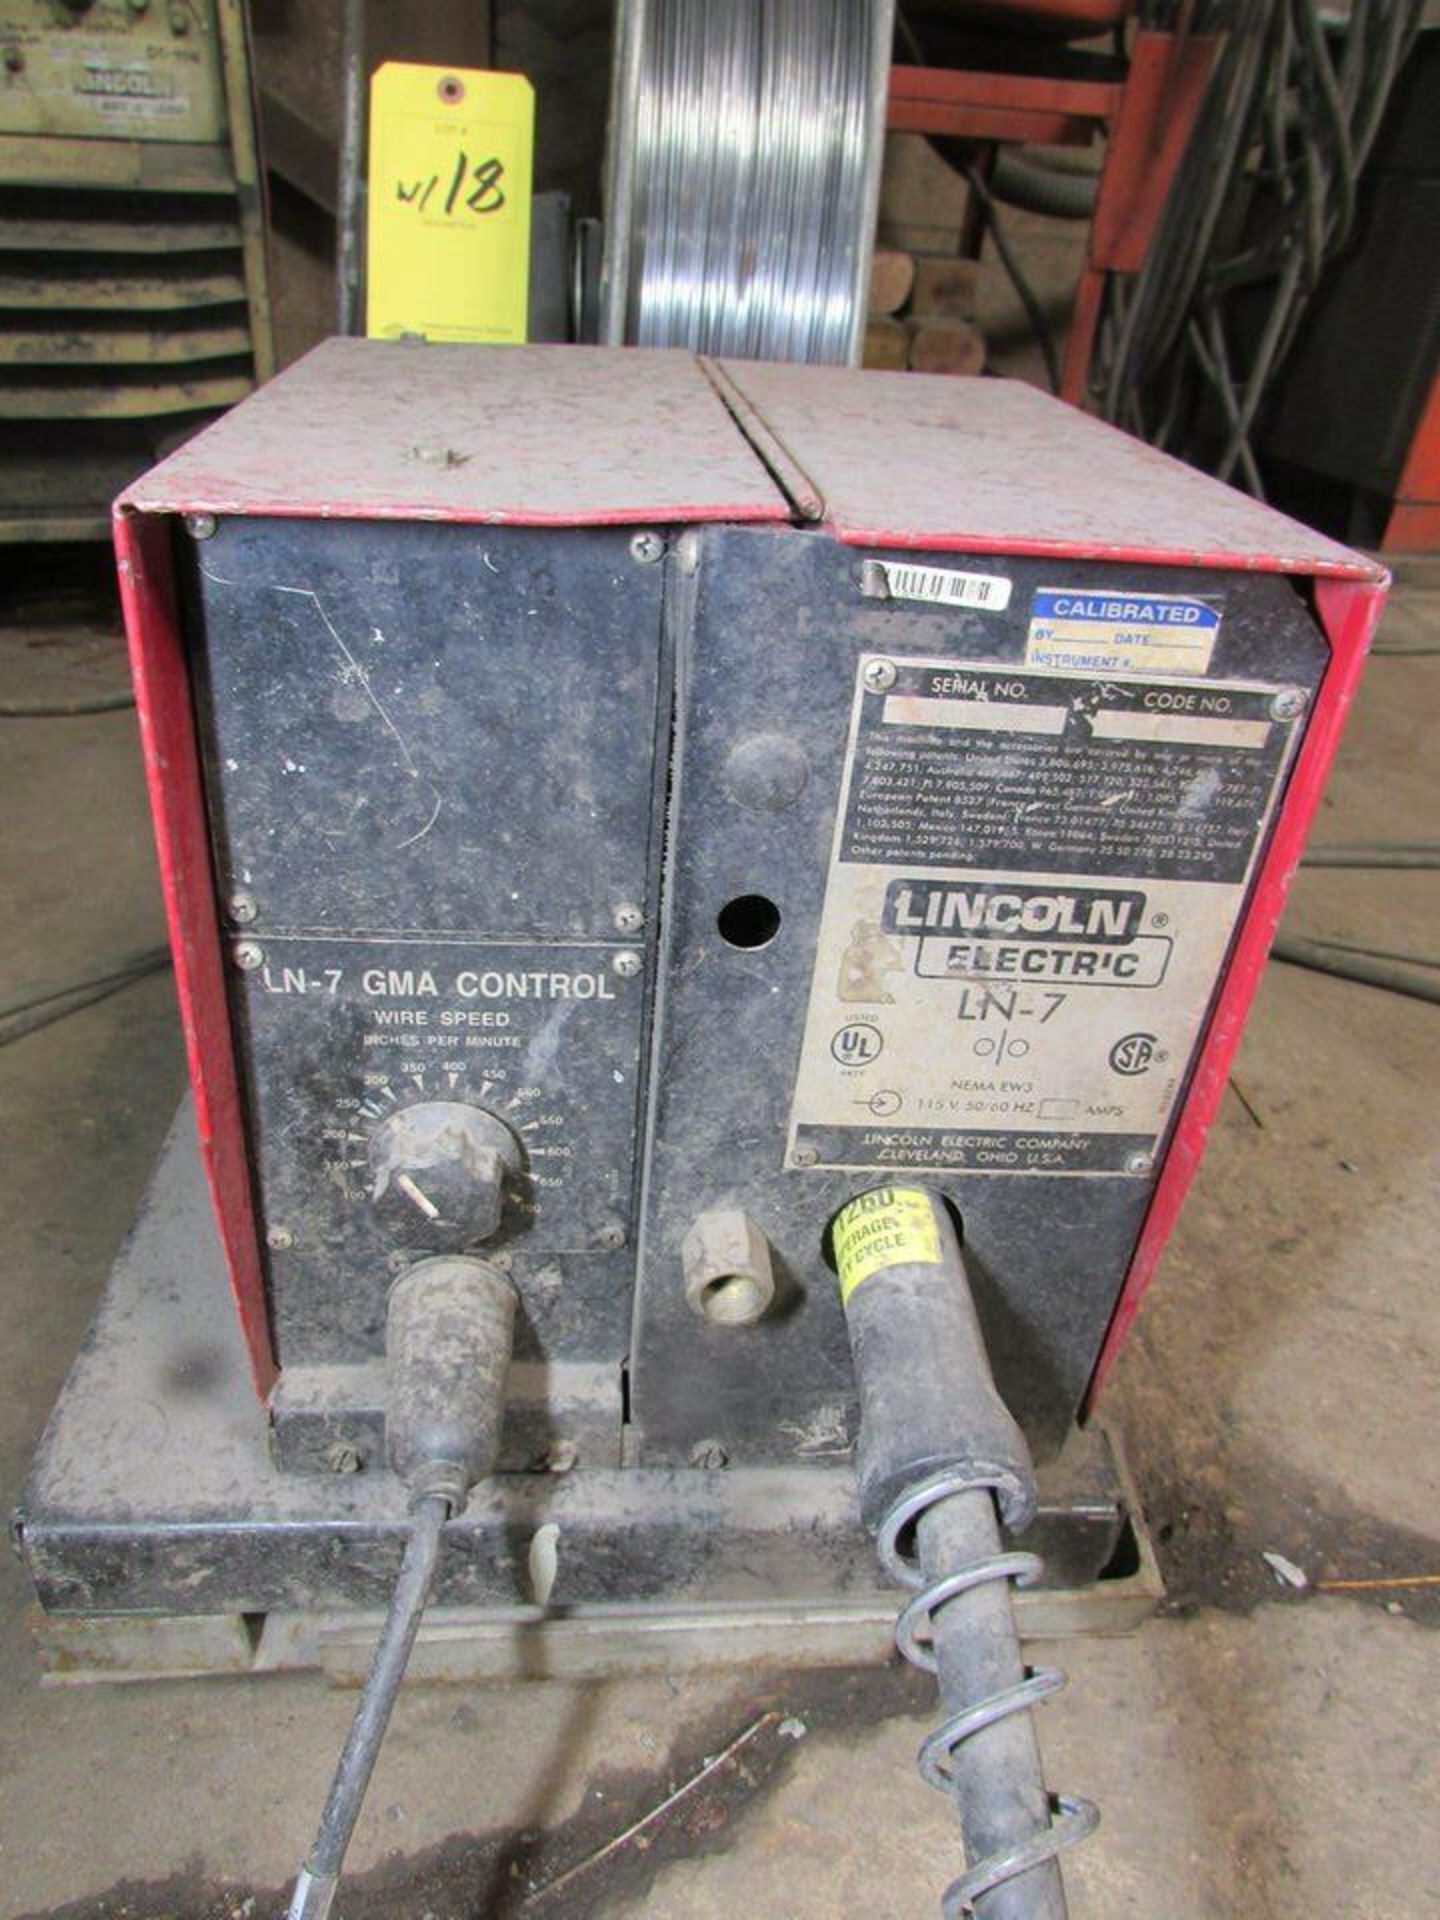 Lincoln Electric Idealarc DC-400 CV CC DC Welding Power Source, 400A Output, 230/460V 3PH Input, s/ - Image 7 of 10